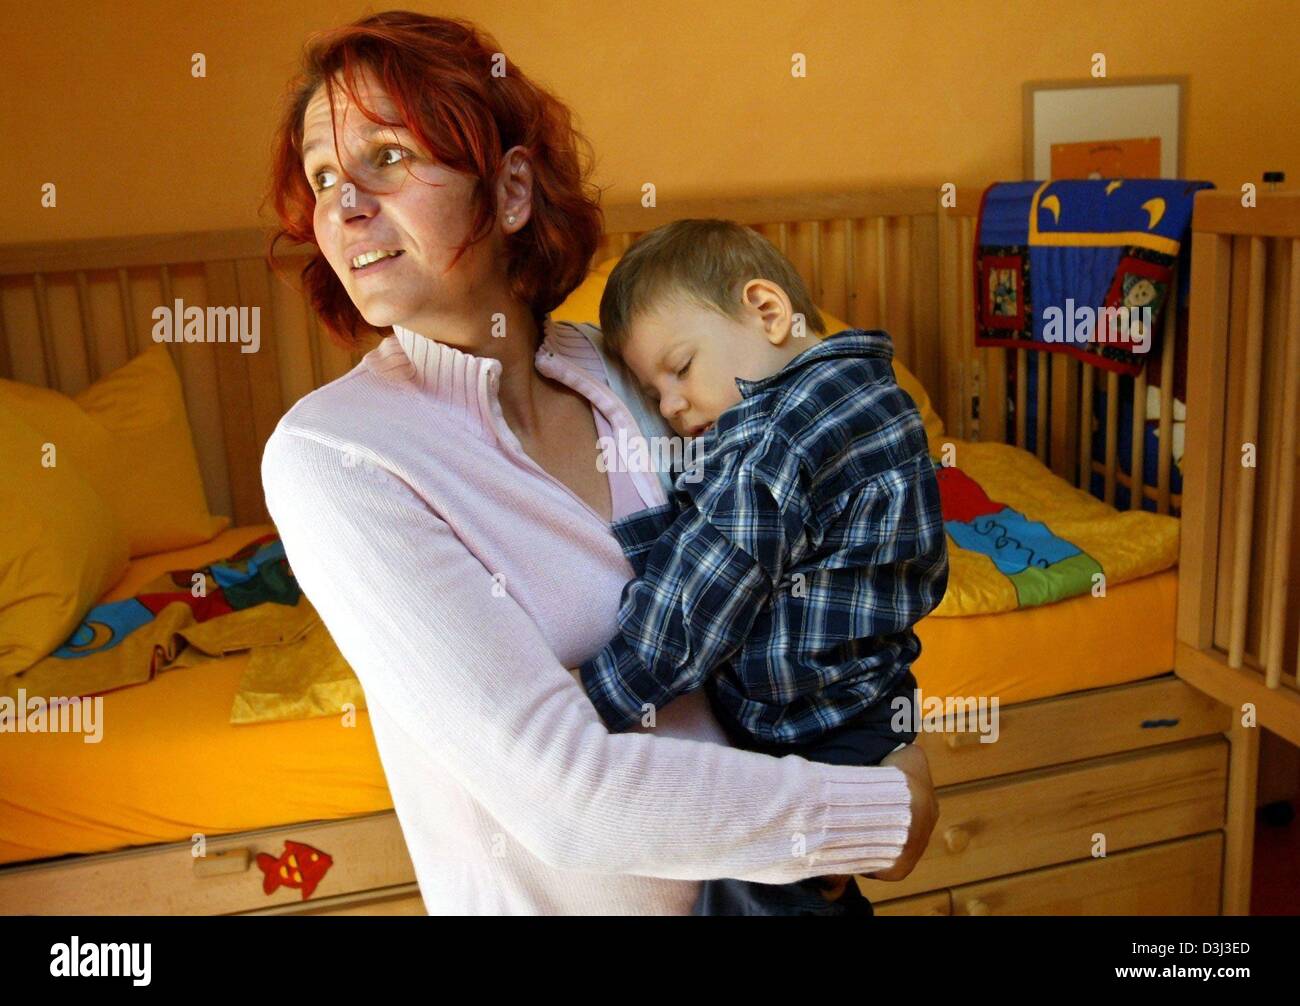 (dpa) - Bettina Zander carries her two and a half year old son Mika who is terminally ill on her arms as she stands in one of the bright children's rooms of the Lionheart hospice for children in Syke, Germany, 20 September 2003. Mika was reanimated after undergoing a surgery, and has since been in a coma vigil due to the oxygen deficiency. Stock Photo